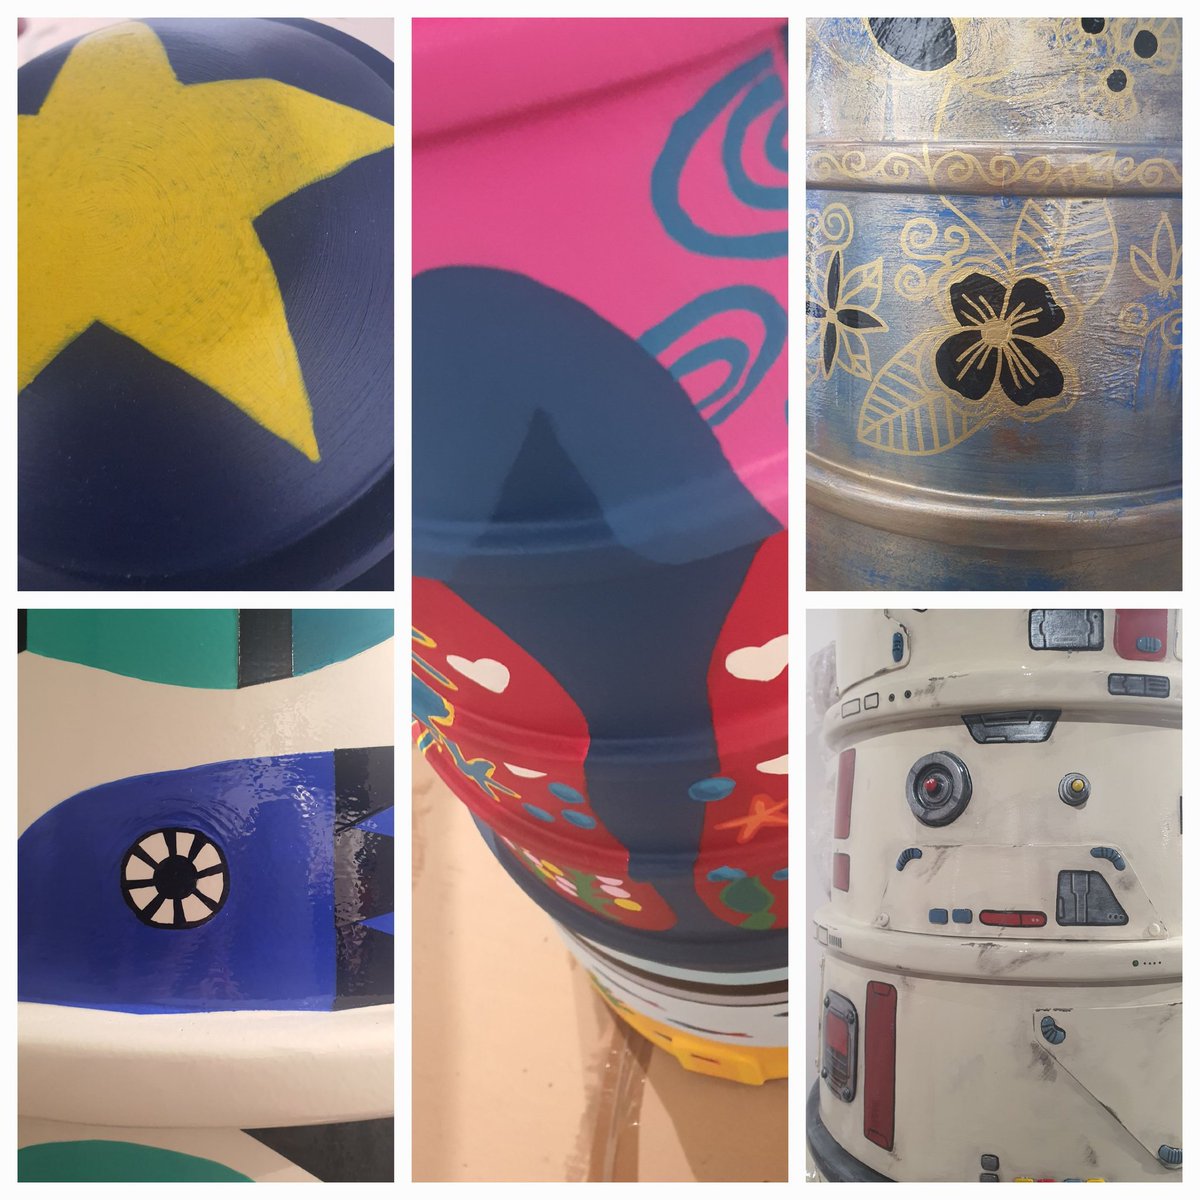 Can't wait for @charity_shc Light the South art trail to open accross Southampton on 13th July and raise money for Southampton Children's Hospital. You can get a sneaky peak of some of the lighthouses at @Westquay